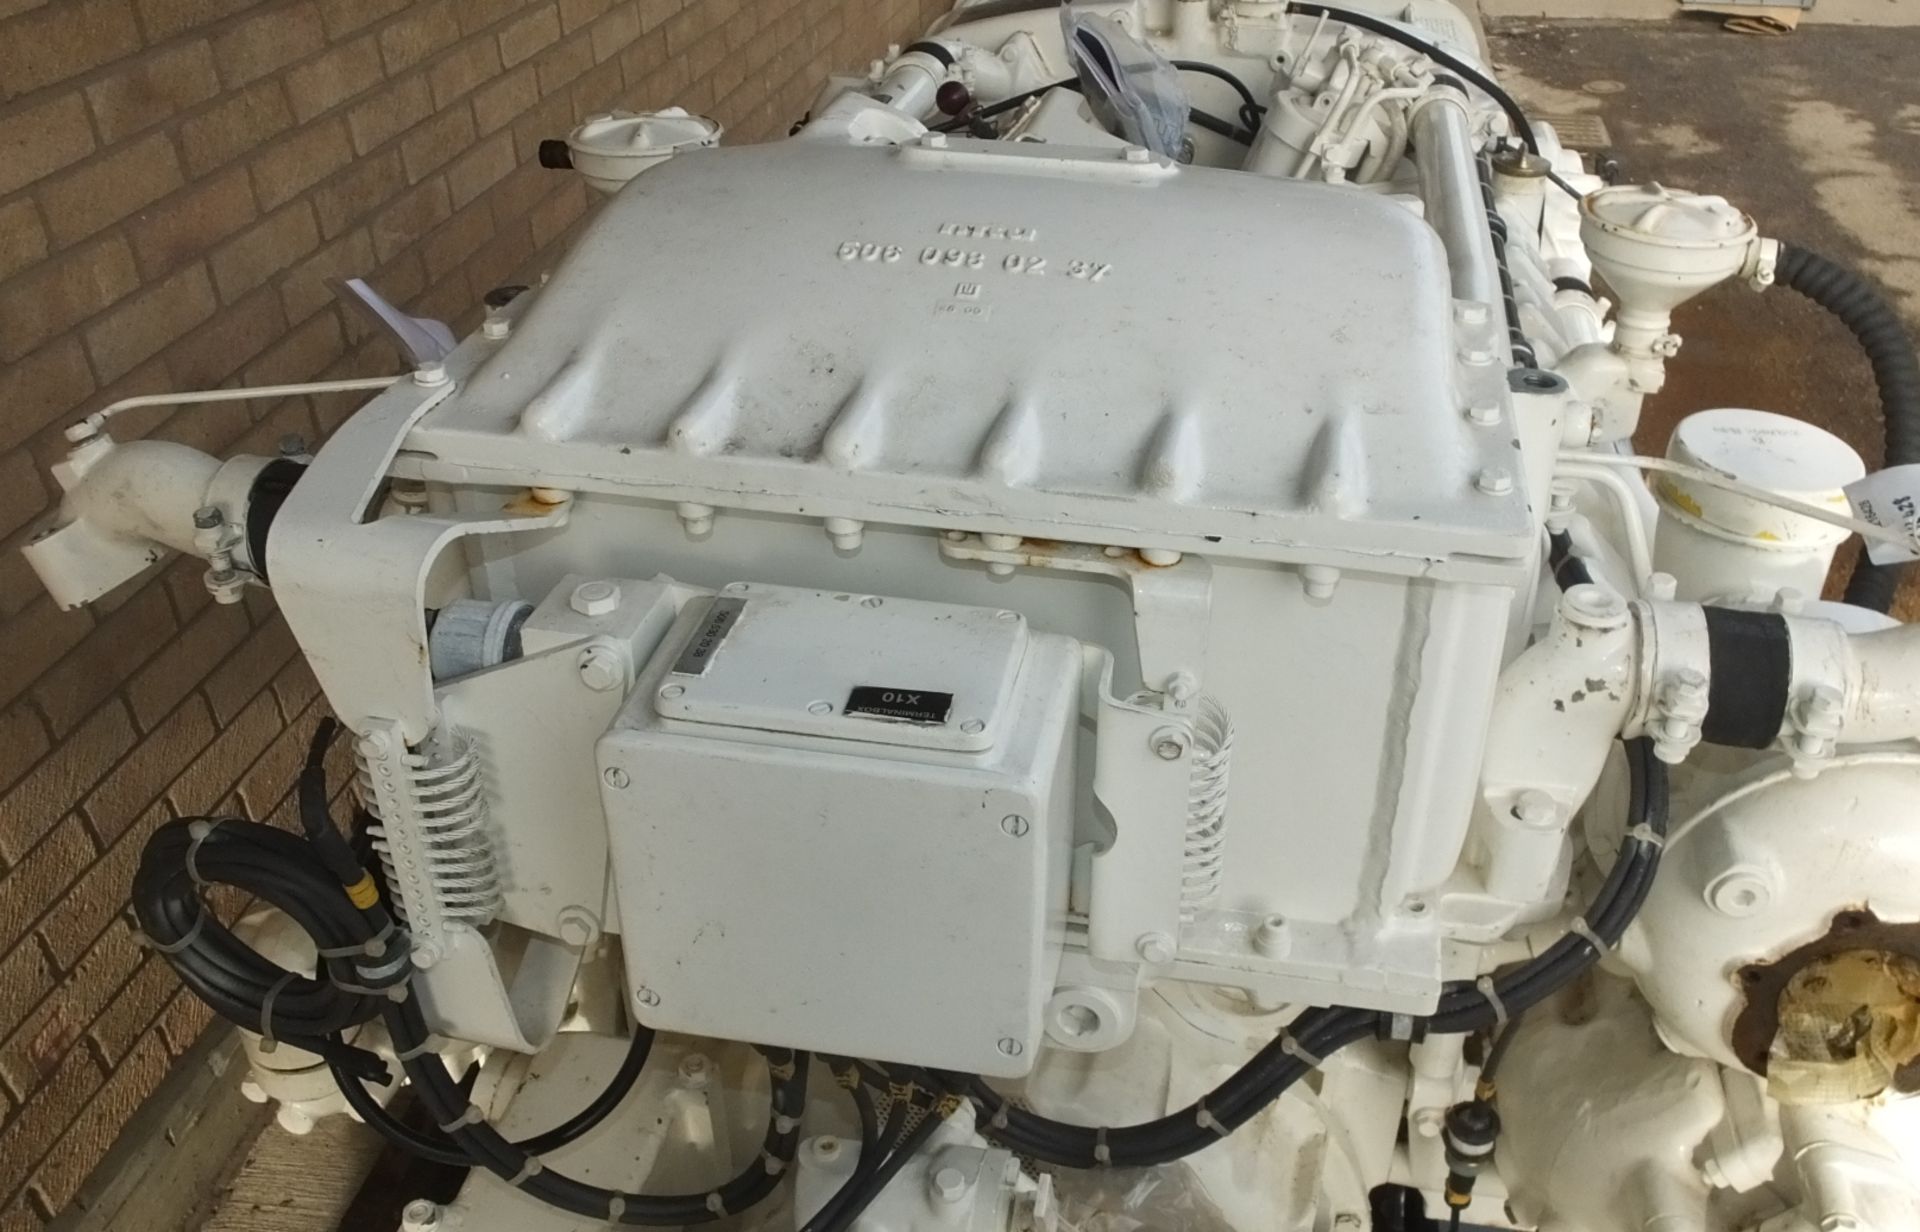 MTU 12V 183 engine - 610kW - 1310HP - 2100 RPM - looks to have only done test hours - very clean - Image 12 of 37